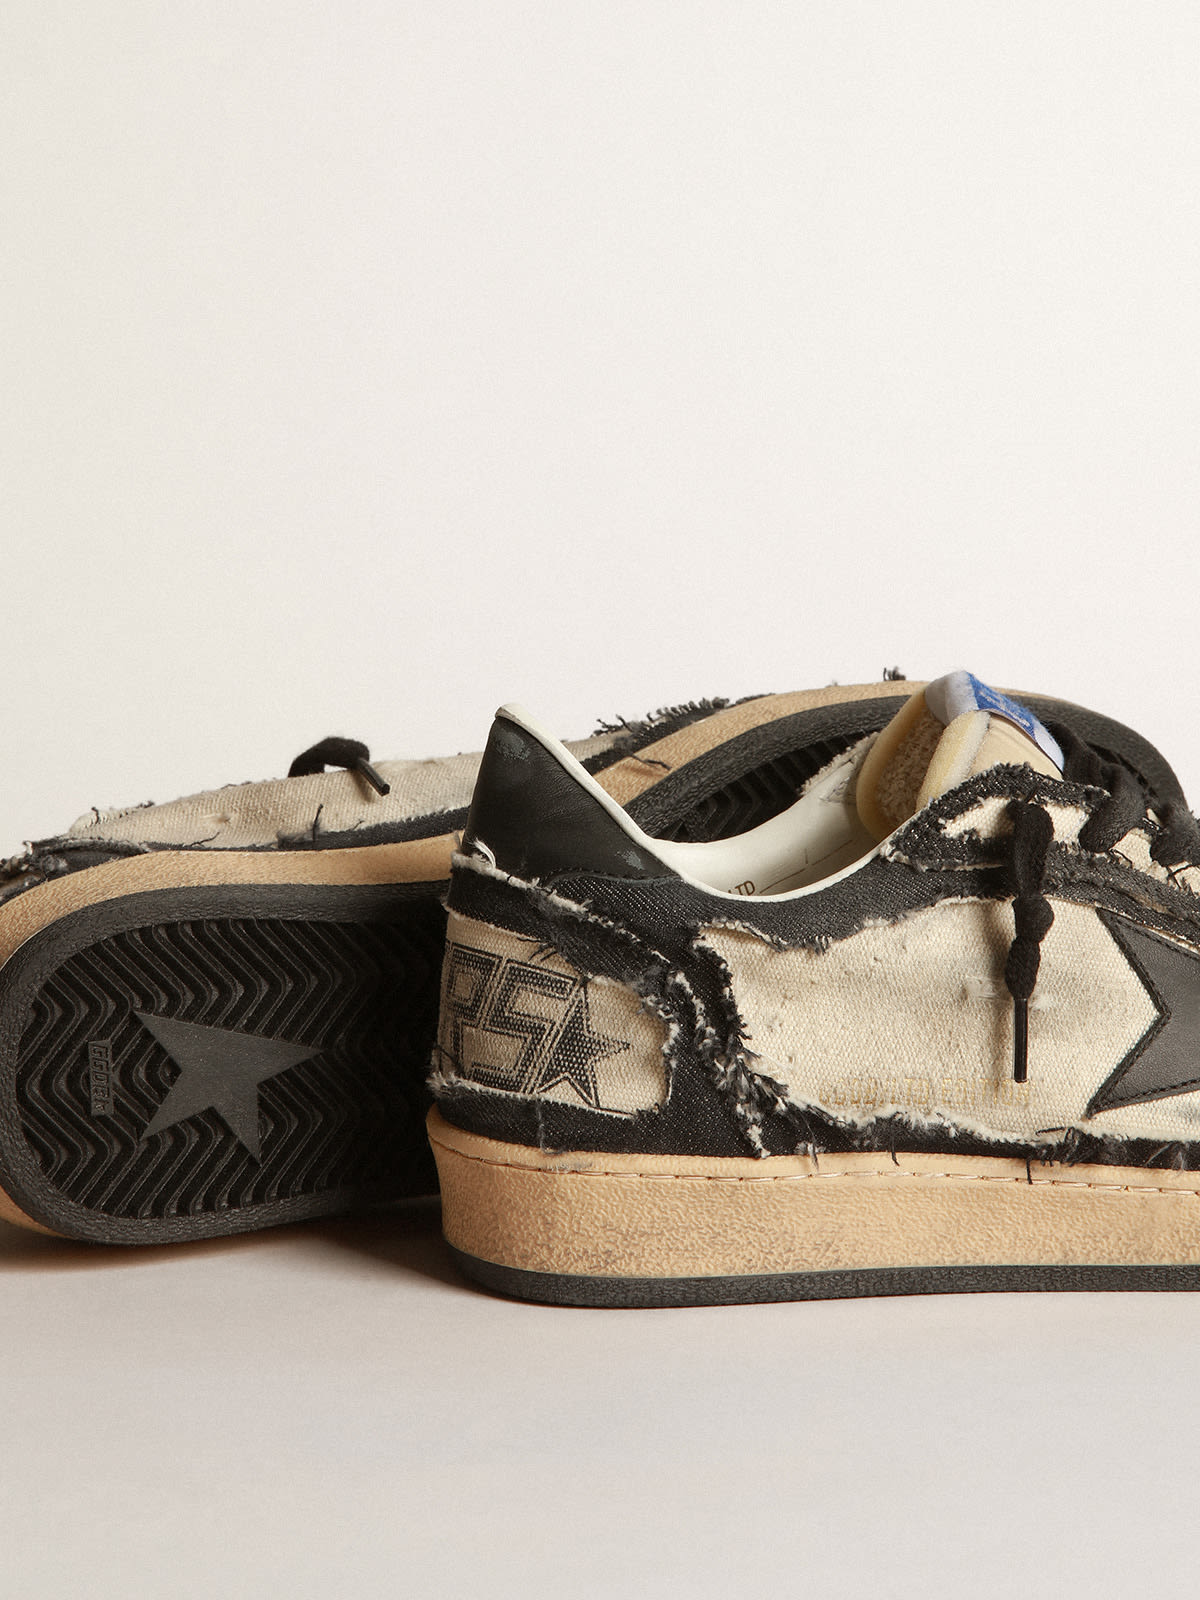 Golden Goose - Men’s Ball Star LAB in white canvas and blue denim with black leather star in 